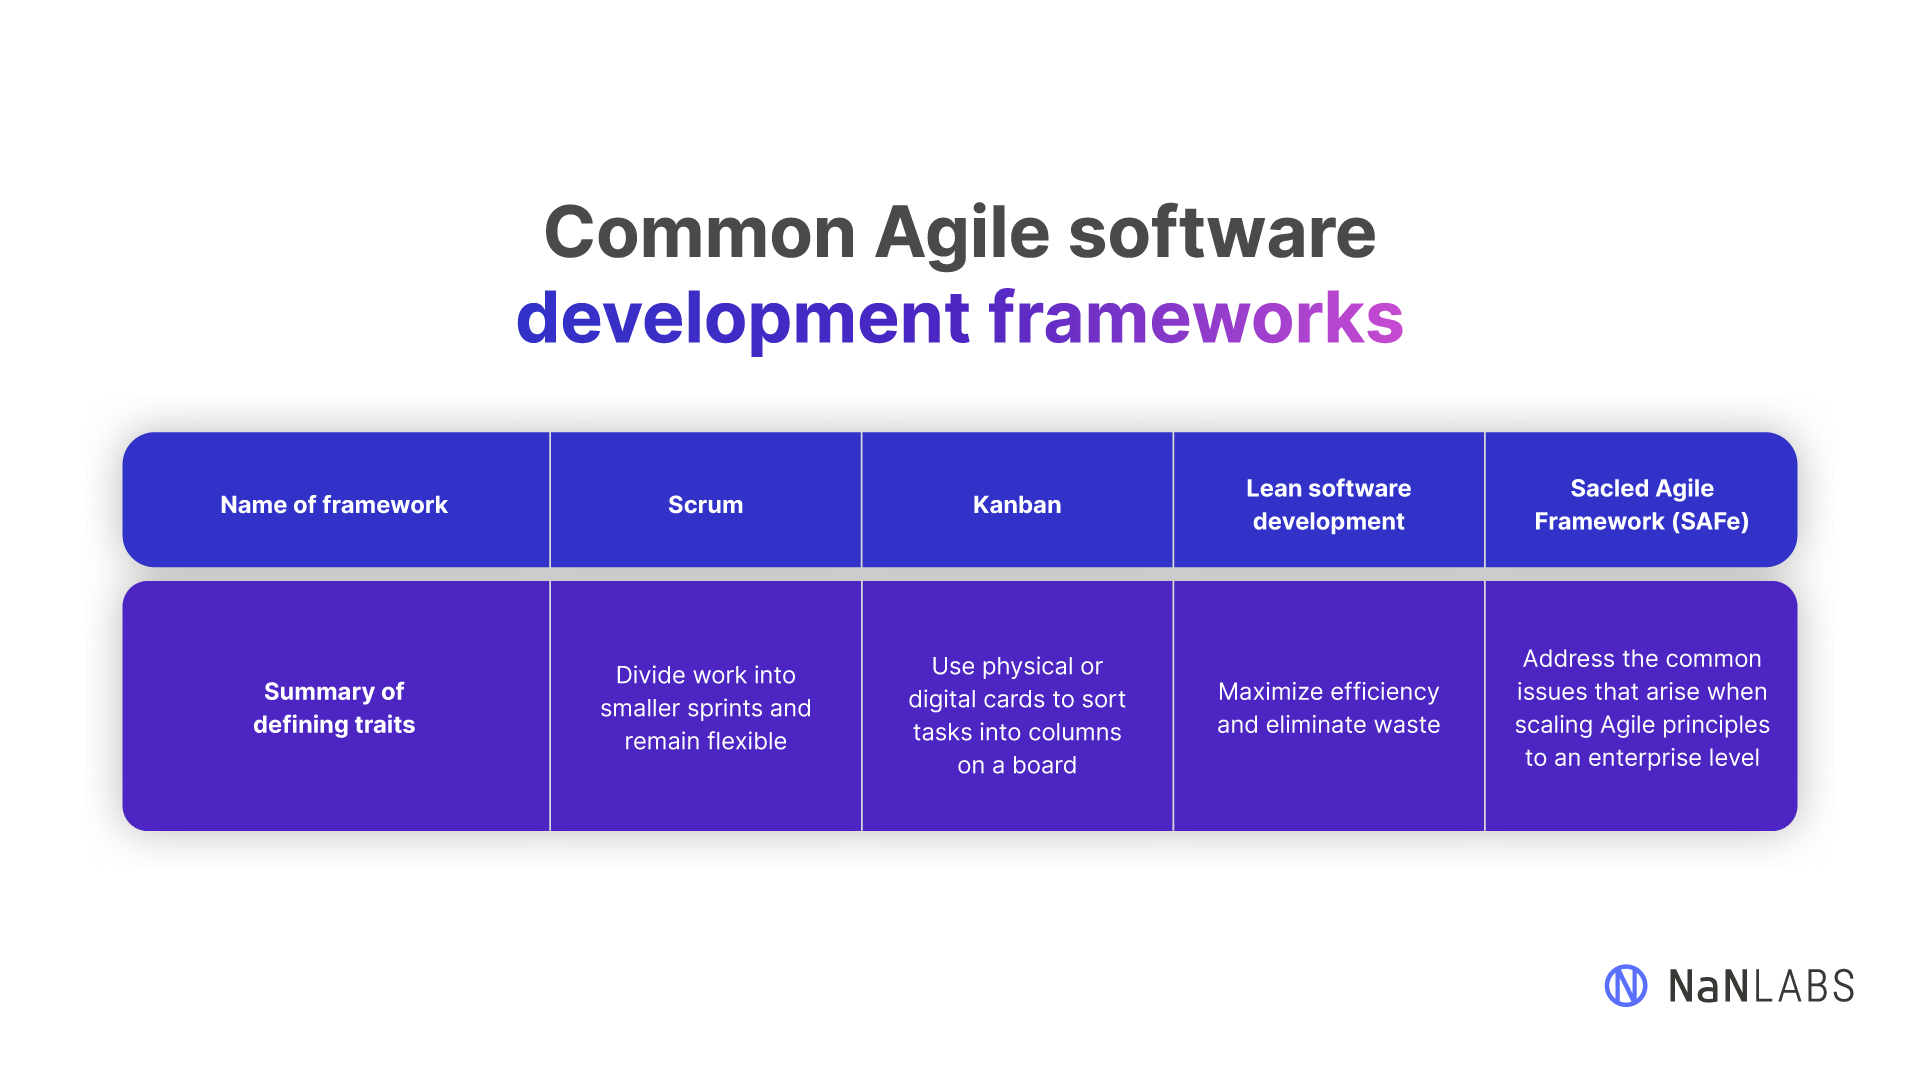 Most common types of Agile frameworks and their traits